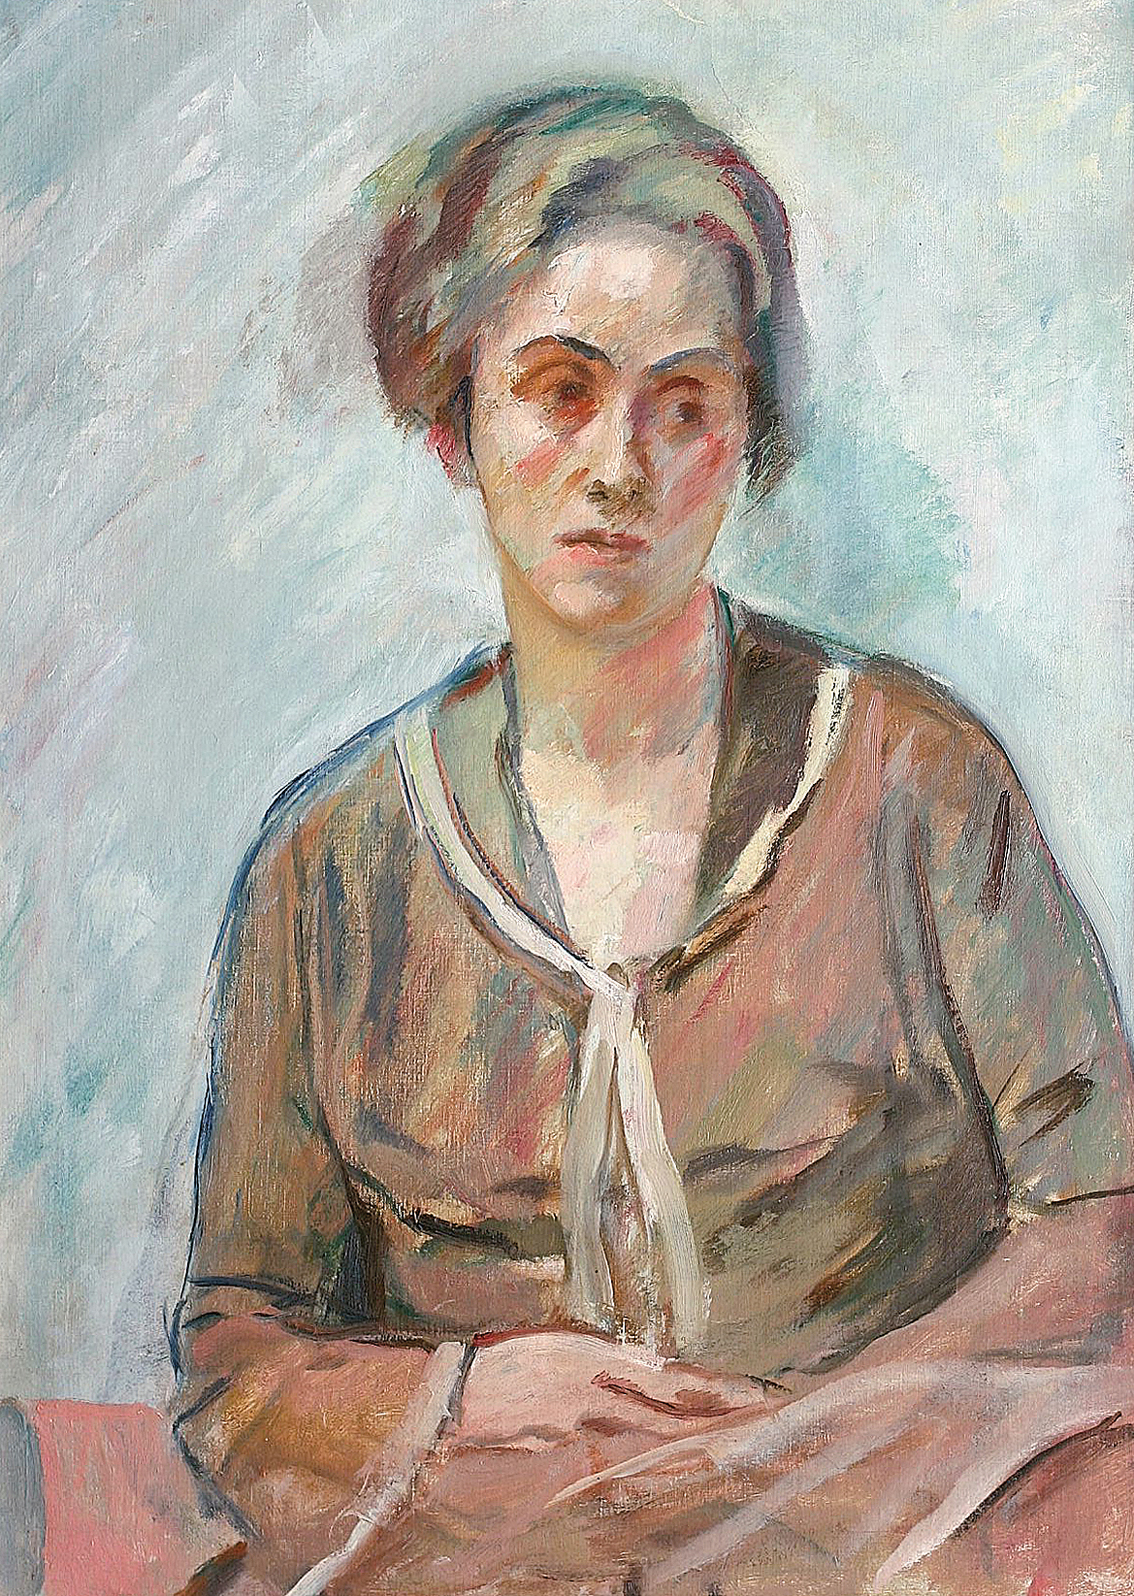 Portrait of a young woman